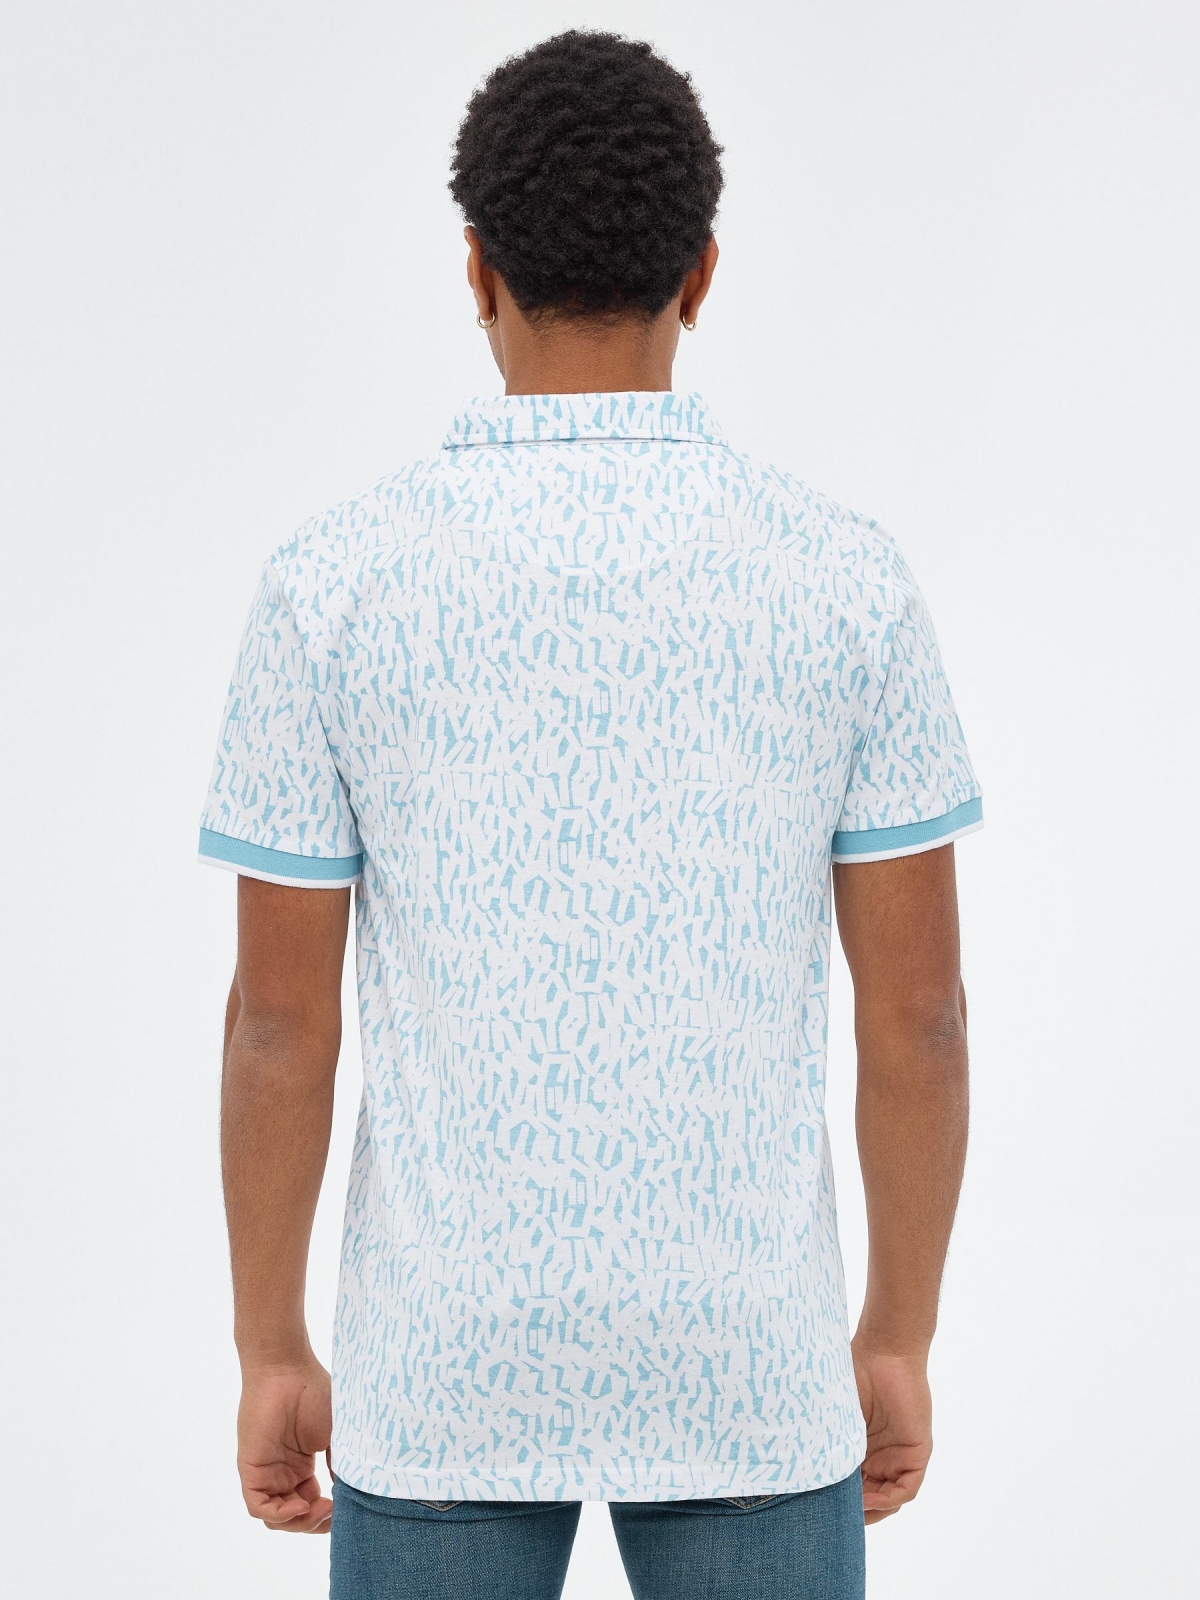 Letter printed polo shirt light blue middle back view